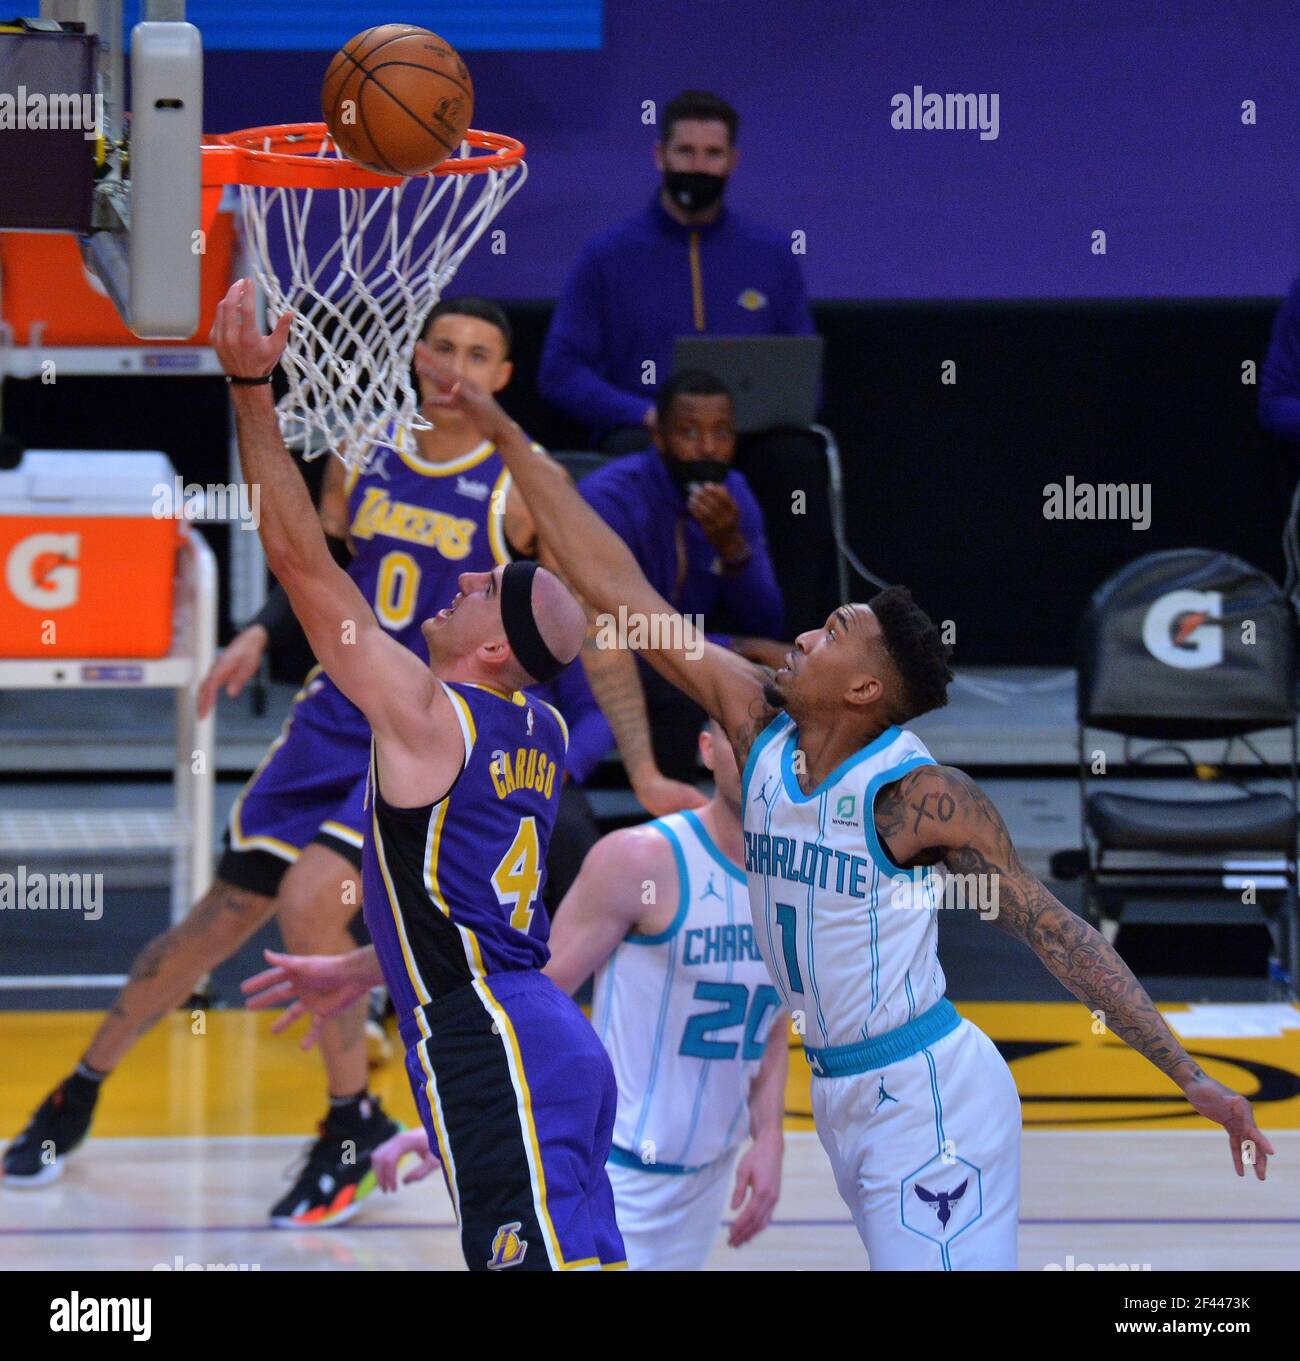 Los Angeles, United States. 18th Mar, 2021. Los Angeles Lakers' guard Alex Caruso scores Charlotte Hornets' guard Malik Monk during the first half at Staples Center in Los Angeles on Thursday, March 18, 2021. The Lakers defeated the Hornets 116-105. Photo by Jim Ruymen/UPI Credit: UPI/Alamy Live News Credit: UPI/Alamy Live News Stock Photo